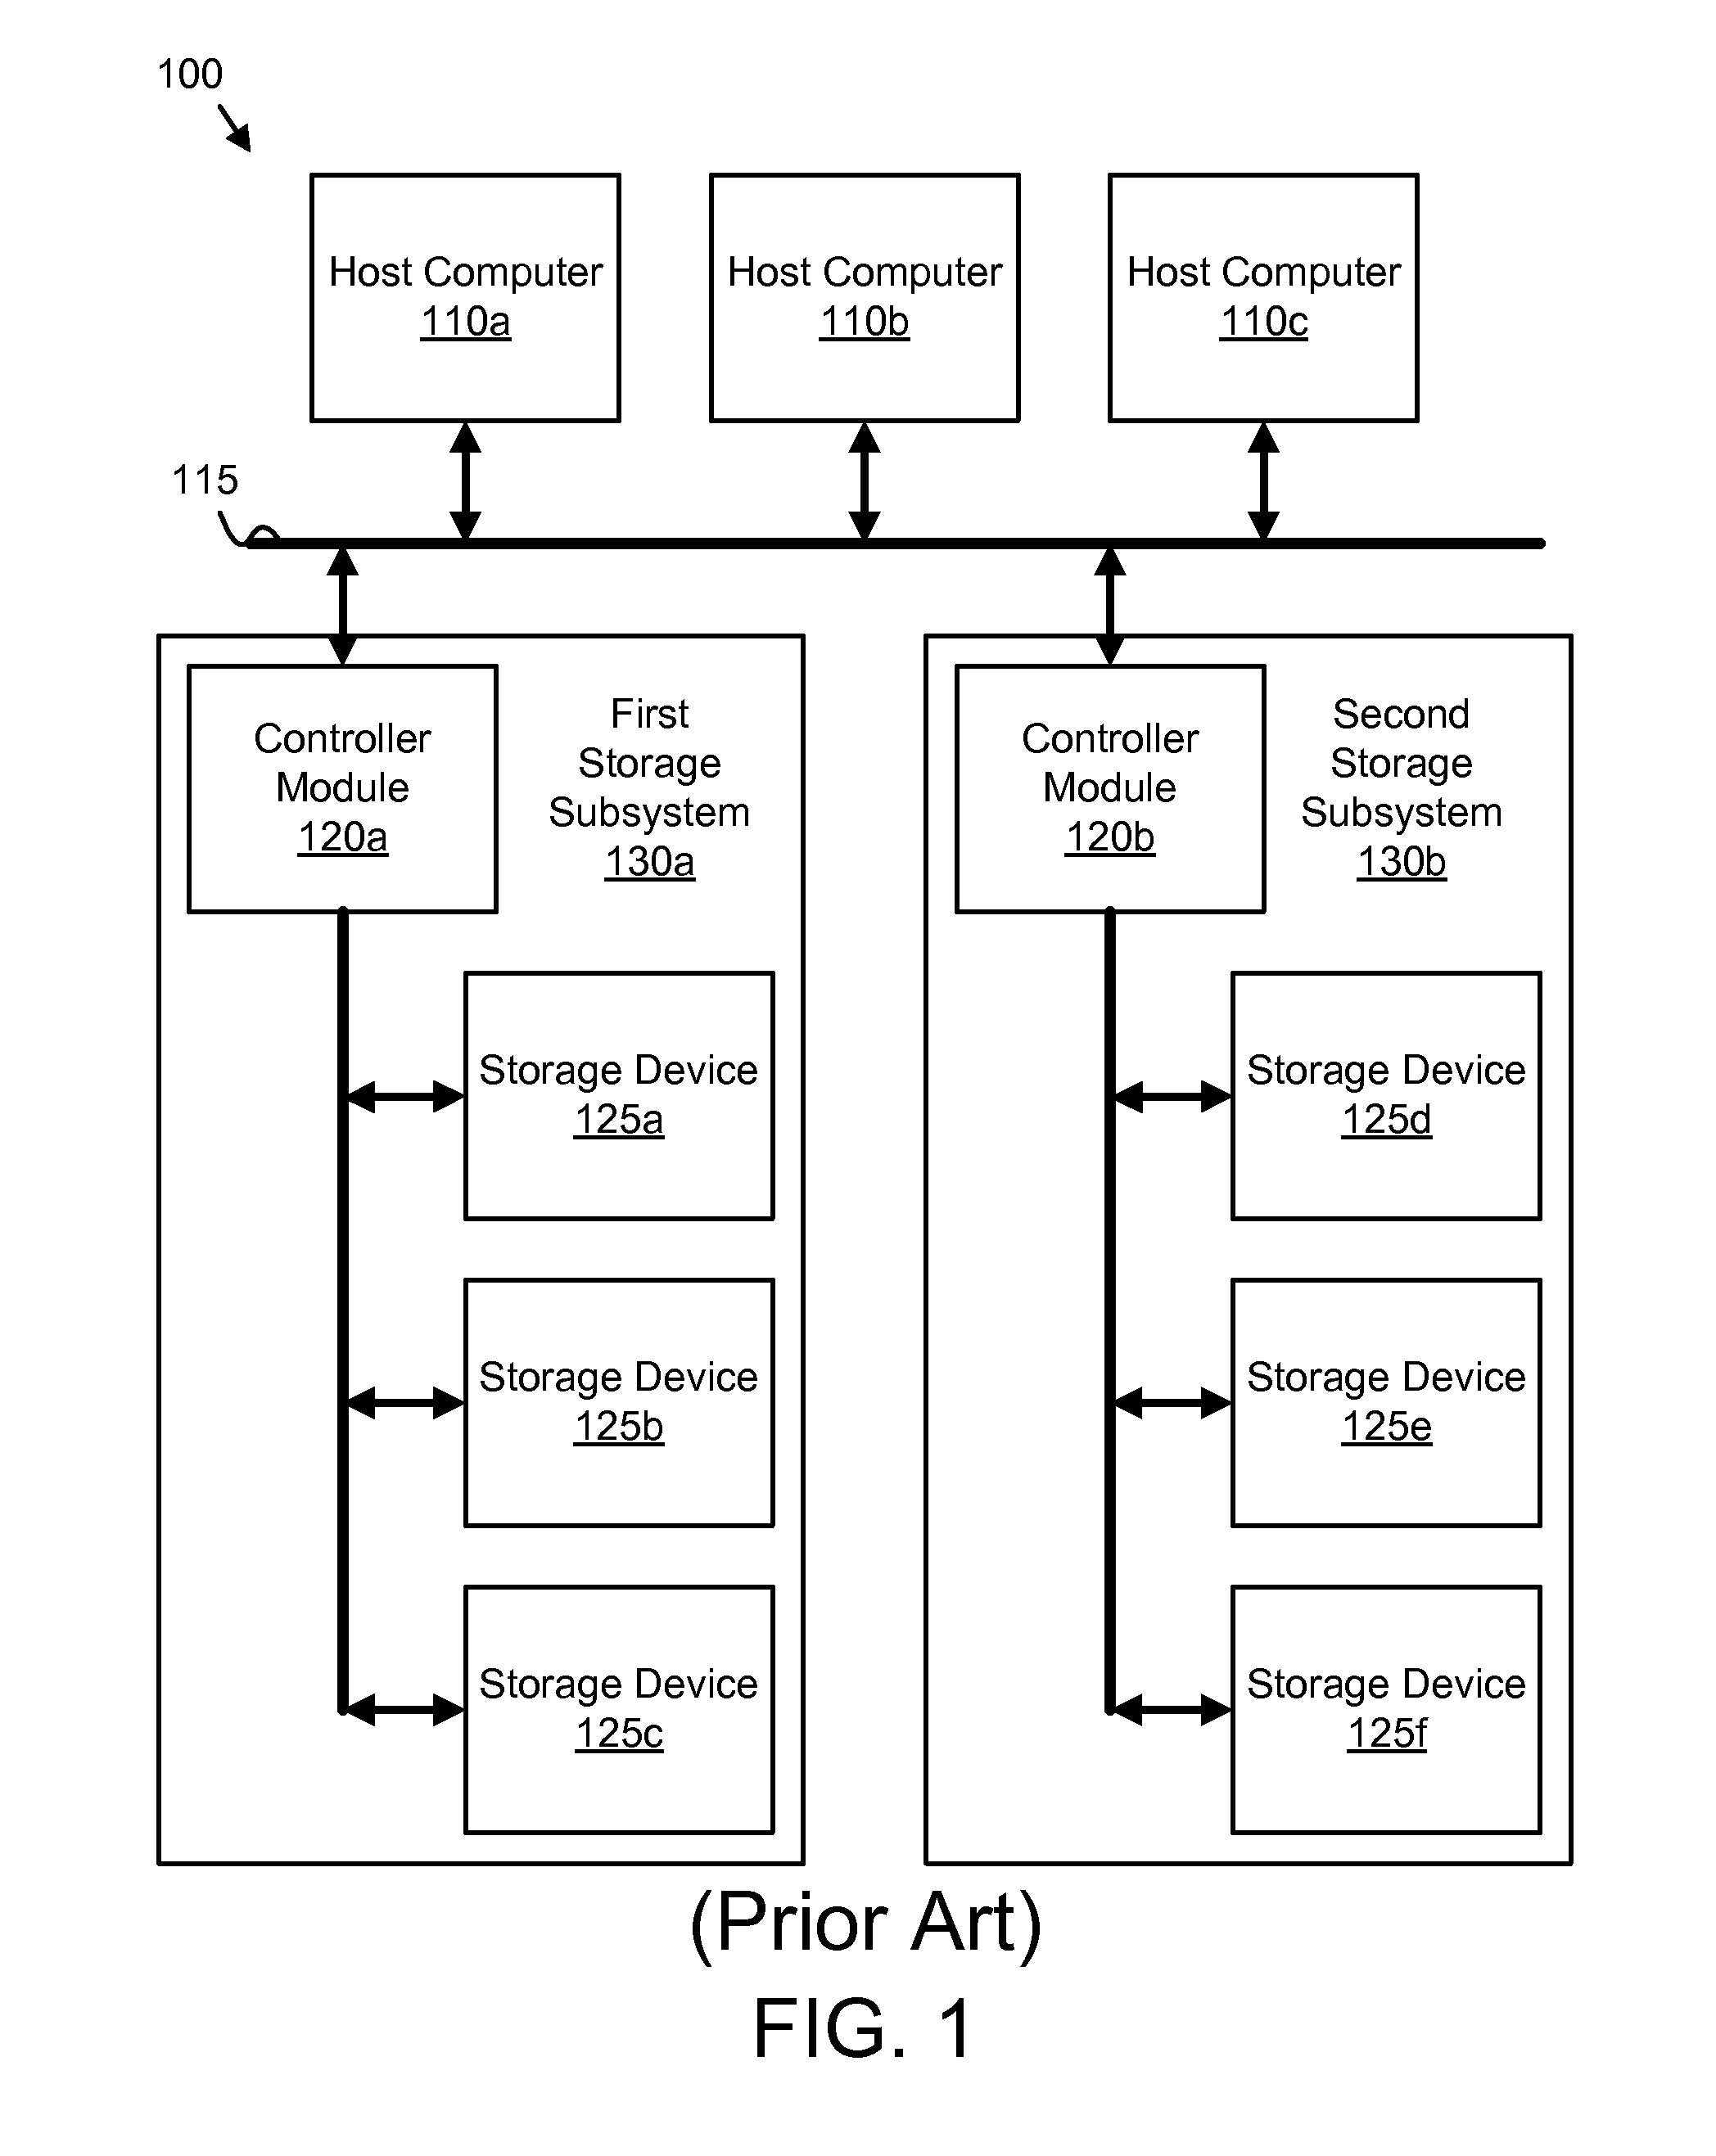 Apparatus, system, and method for validating logical volume configuration